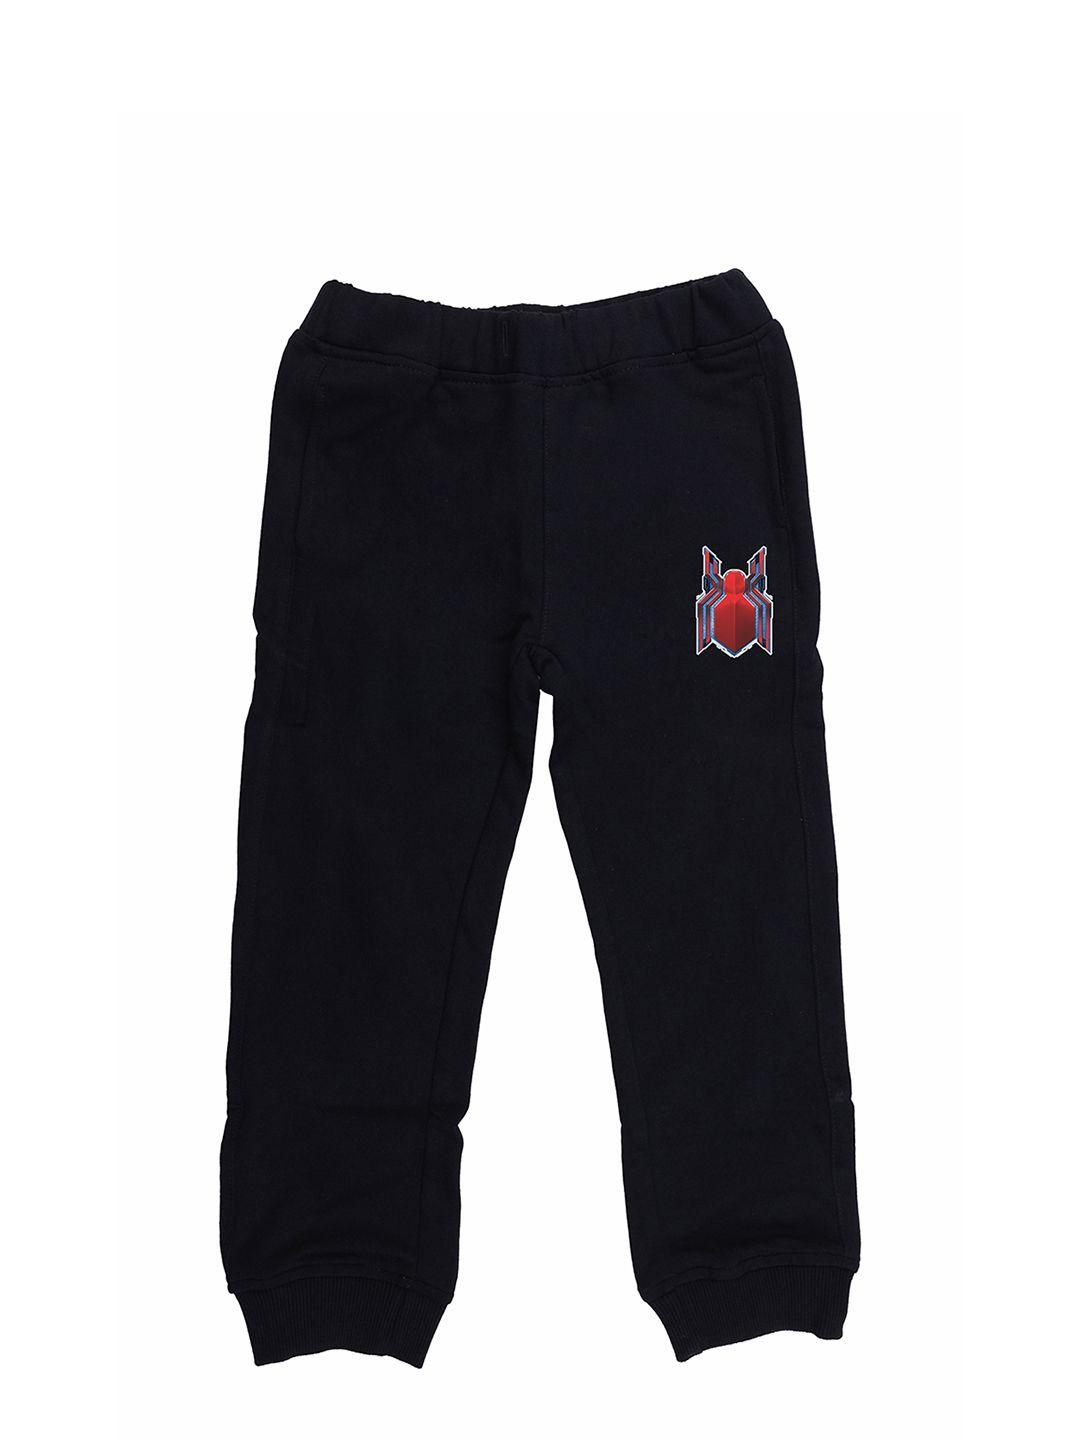 marvel by wear your mind kids navy blue joggers